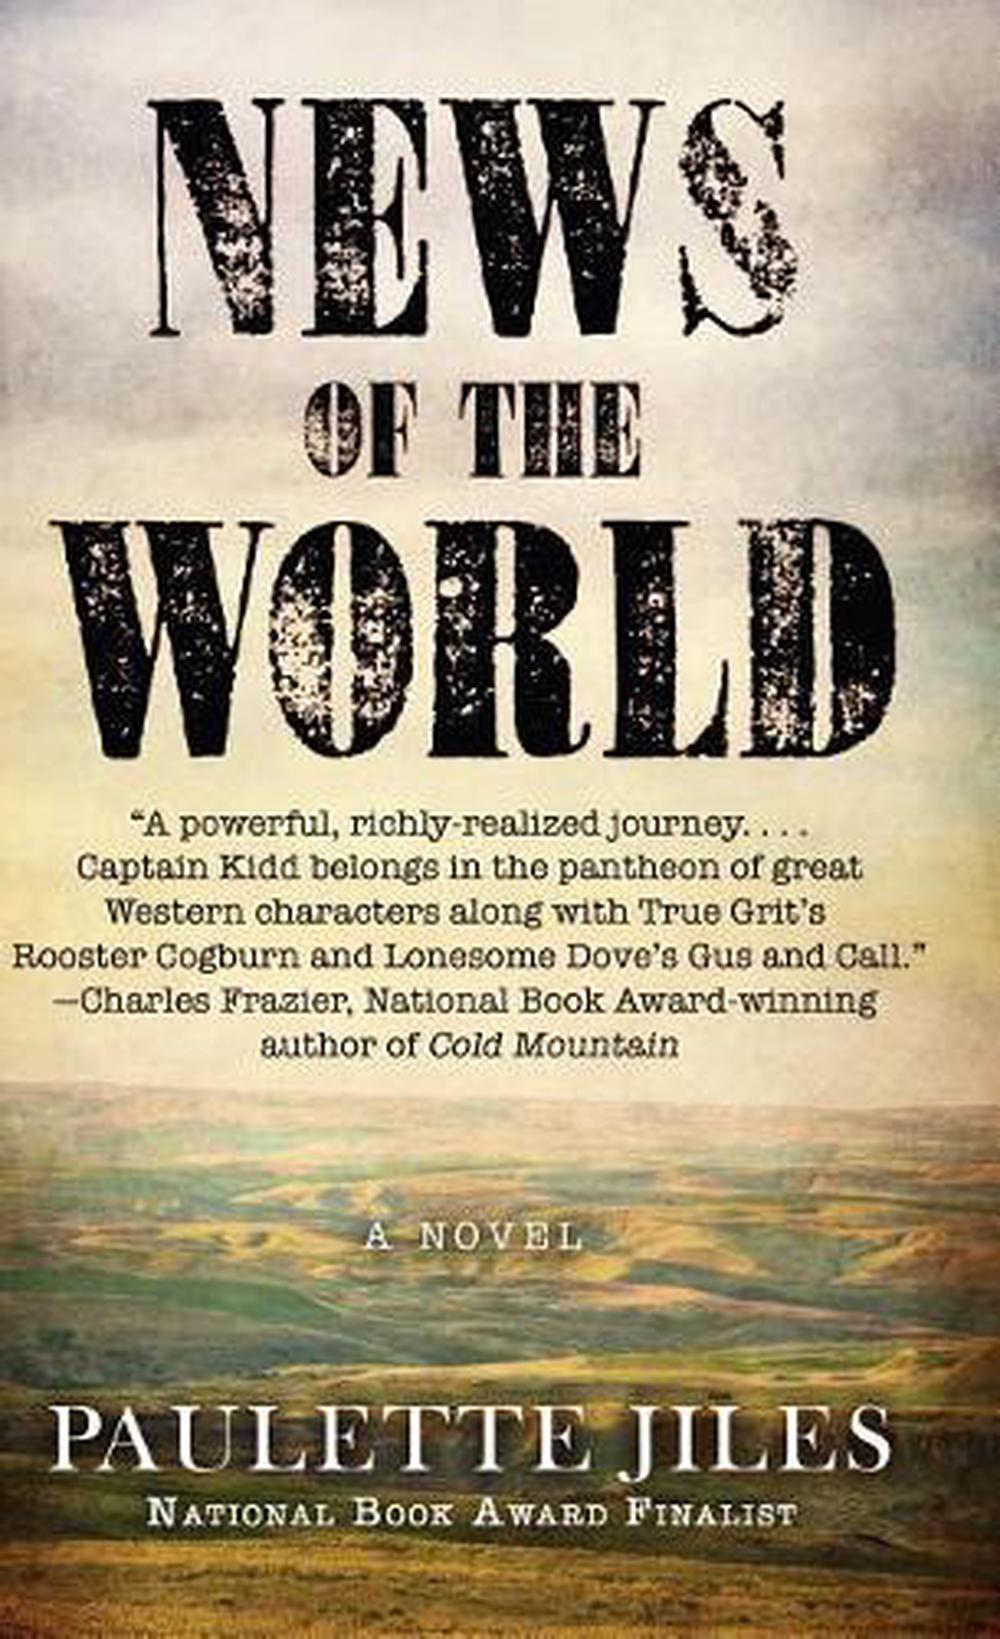 news of the world by paulette jiles